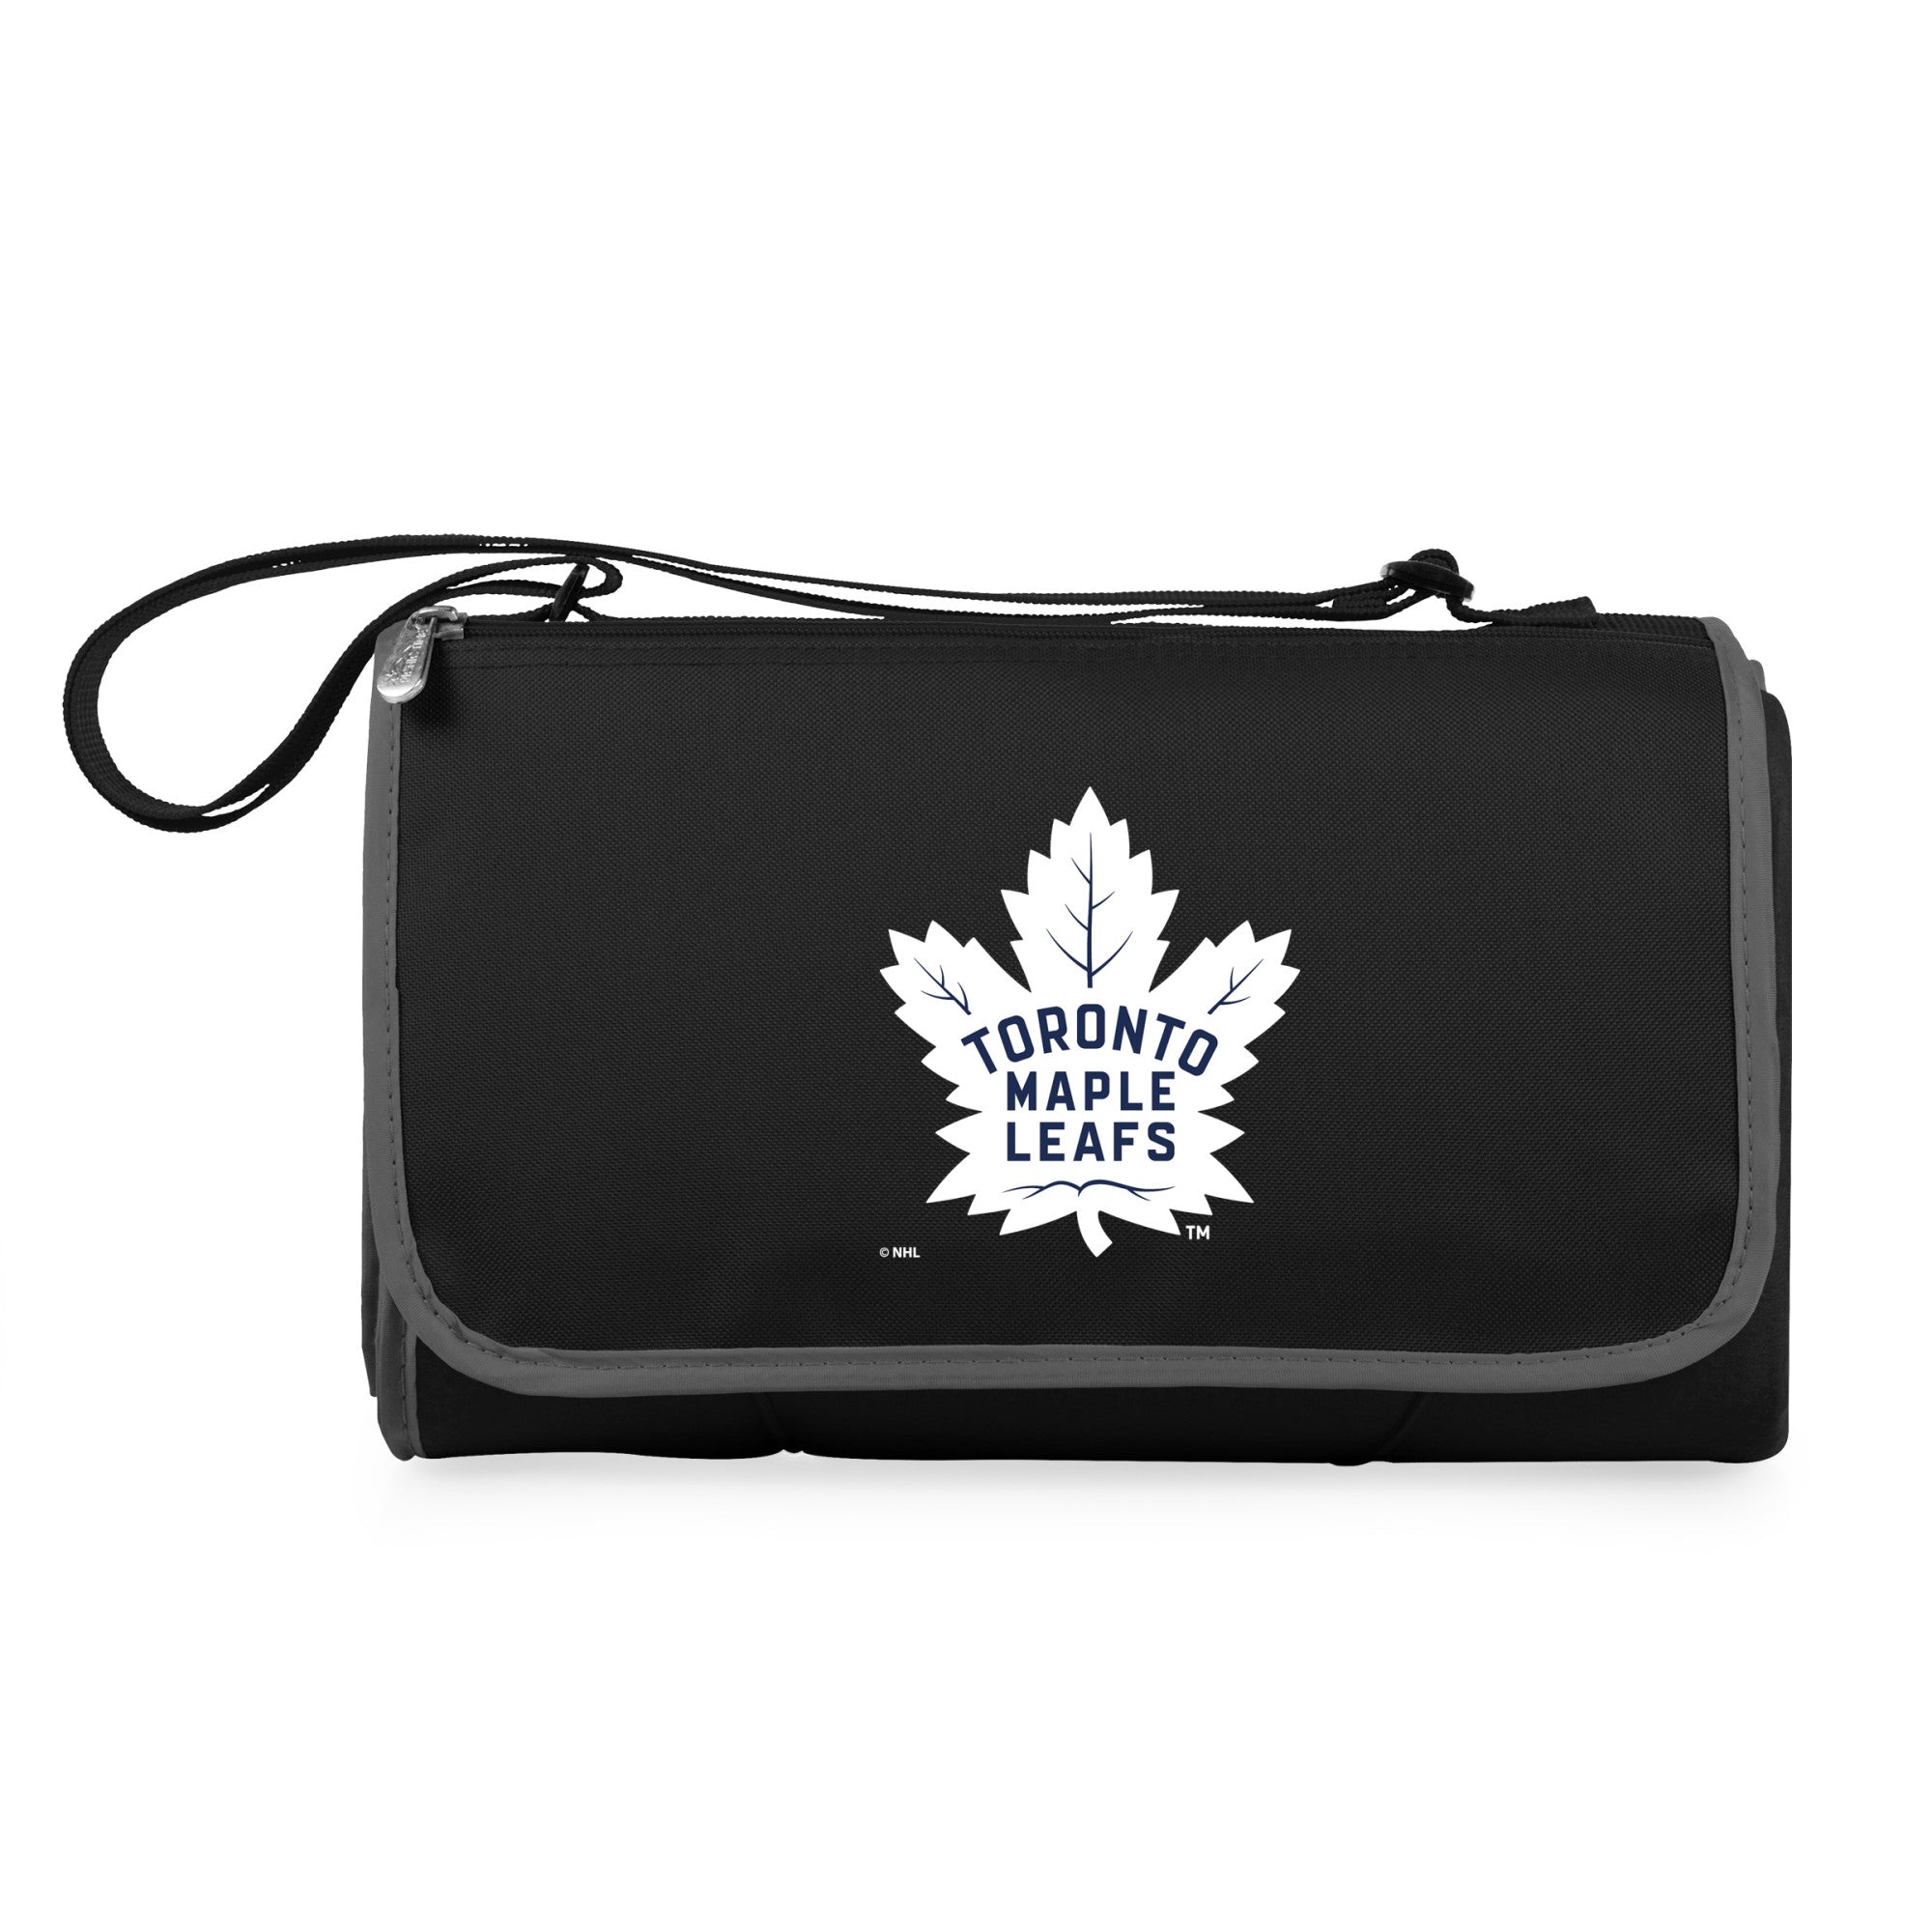 Toronto Maple Leafs - Blanket Tote Outdoor Picnic Blanket